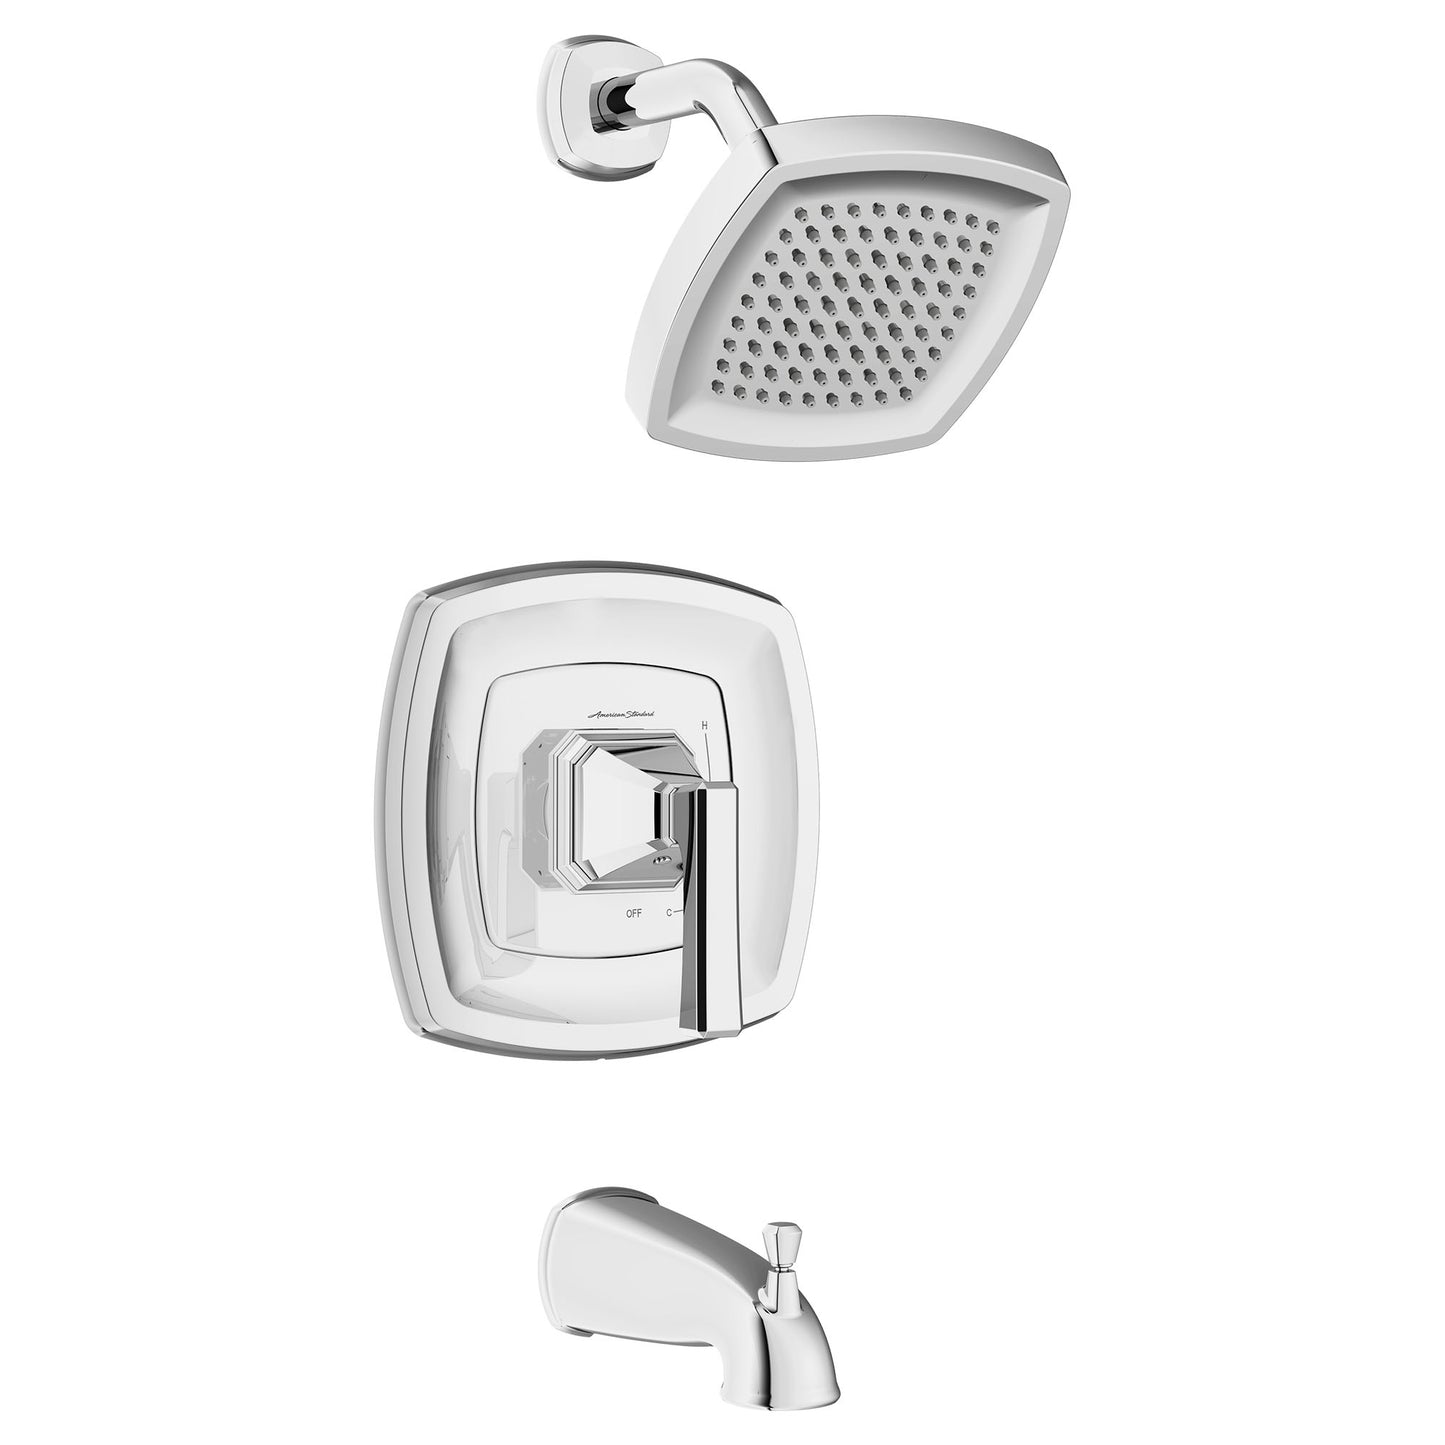 CRAWFORD 2.5 GPM SHOWER TRIM KIT WITH SHOWER HEAD AND FAUCET